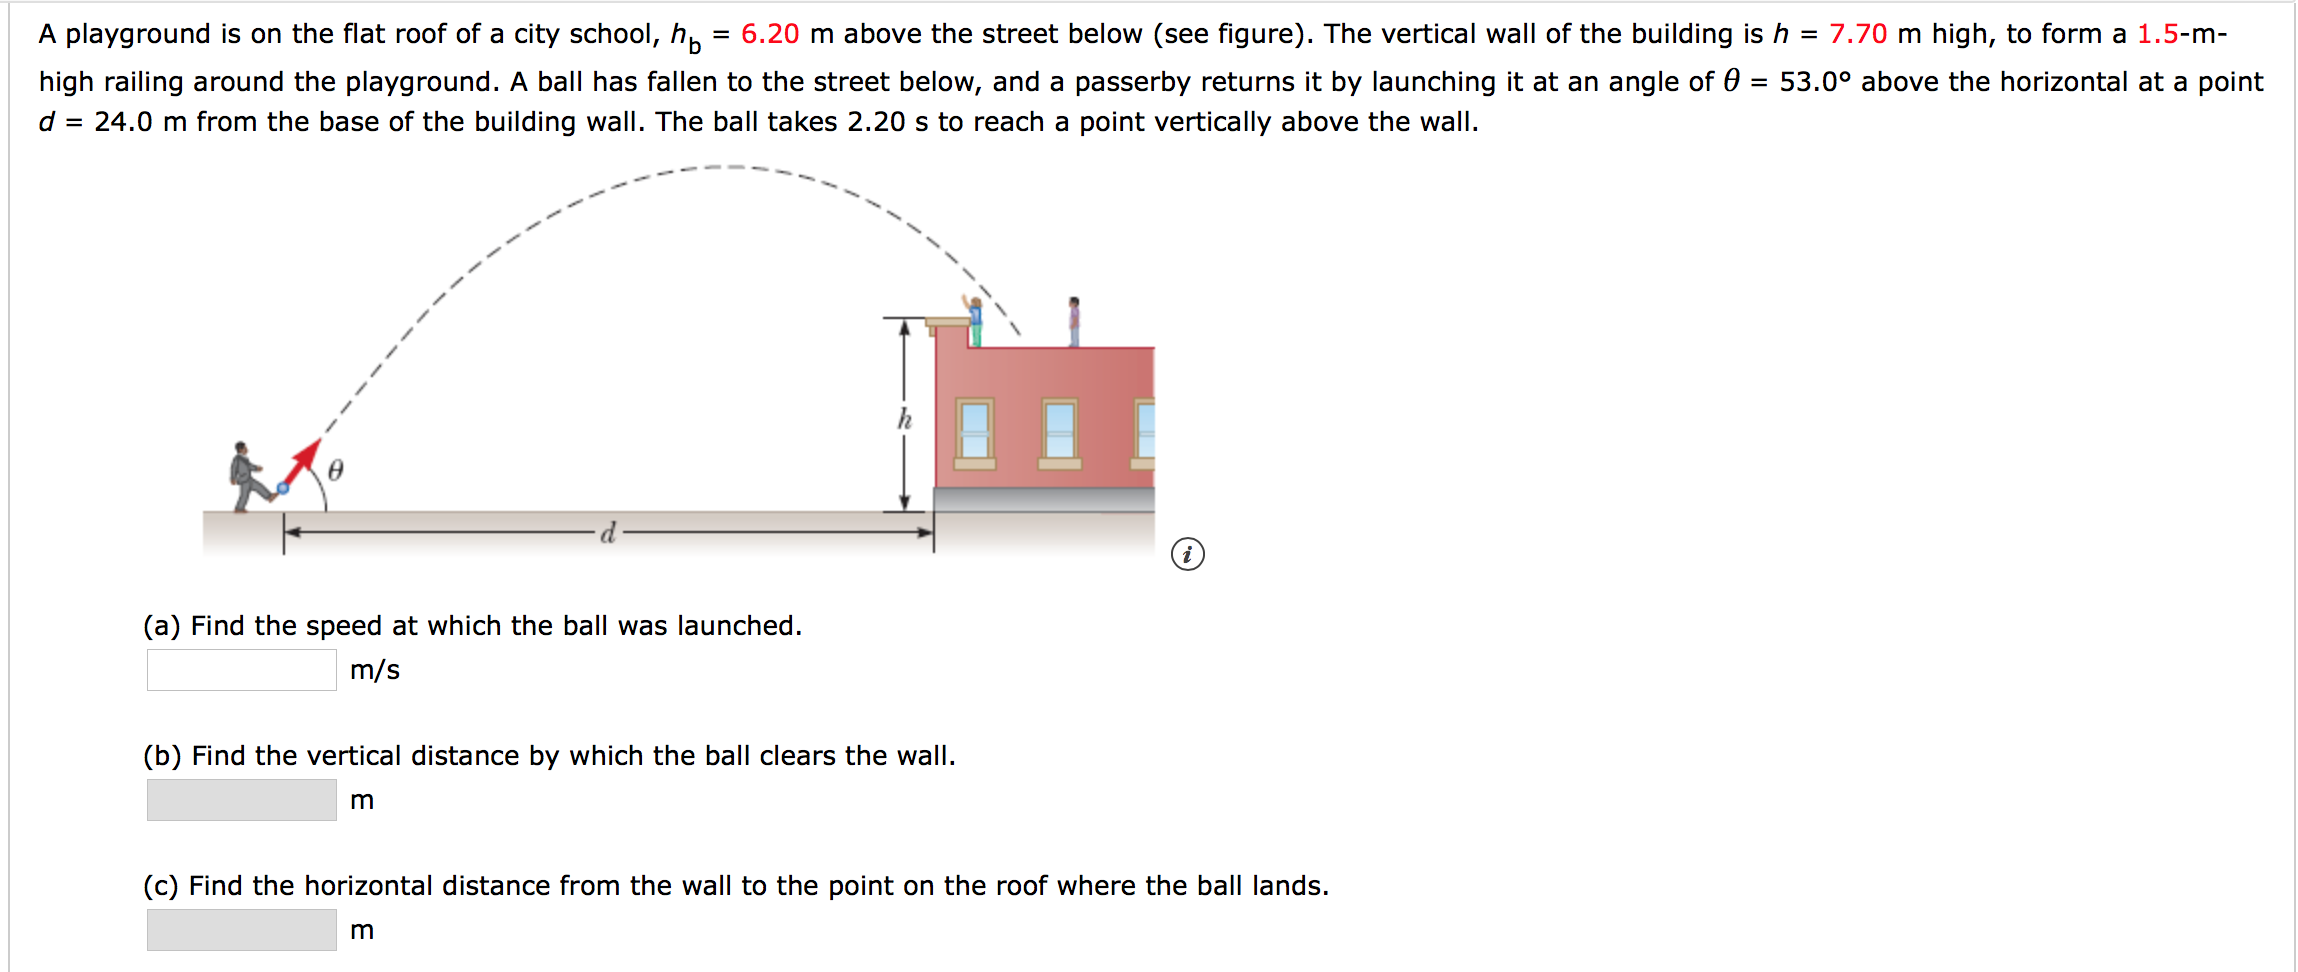 6.20 m above the street below (see figure). The vertical wall of the building ish = 7.70 m high, to form a 1.5-m-
A playground is on the flat roof of a city school, hp
high railing around the playground. A ball has fallen to the street below, and a passerby returns it by launching it at an angle of 0 = 53.0° above the horizontal at a point
24.0 m from the base of the building wall. The ball takes 2.20 s to reach a point vertically above the wall
=
(a) Find the speed at which the ball was launched.
m/s
(b) Find the vertical distance by which the ball clears the wall
m
(c) Find the horizontal distance from the wall to the point on the roof where the ball lands.
